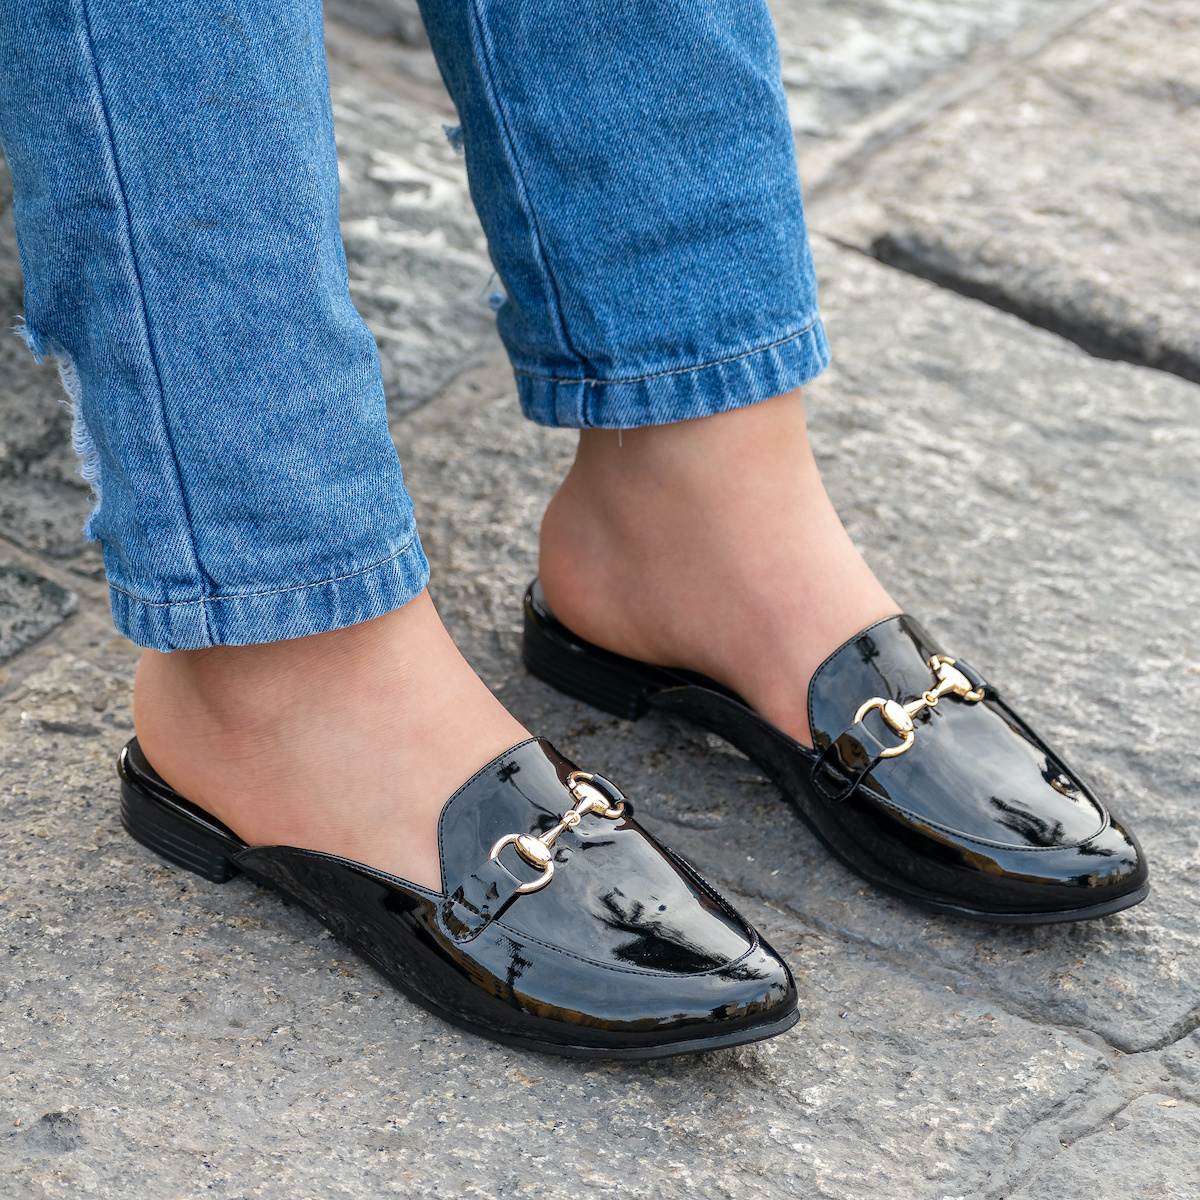 How to Wear Mules: 5 Styling Tips for Wearing Mules - 2023 - MasterClass